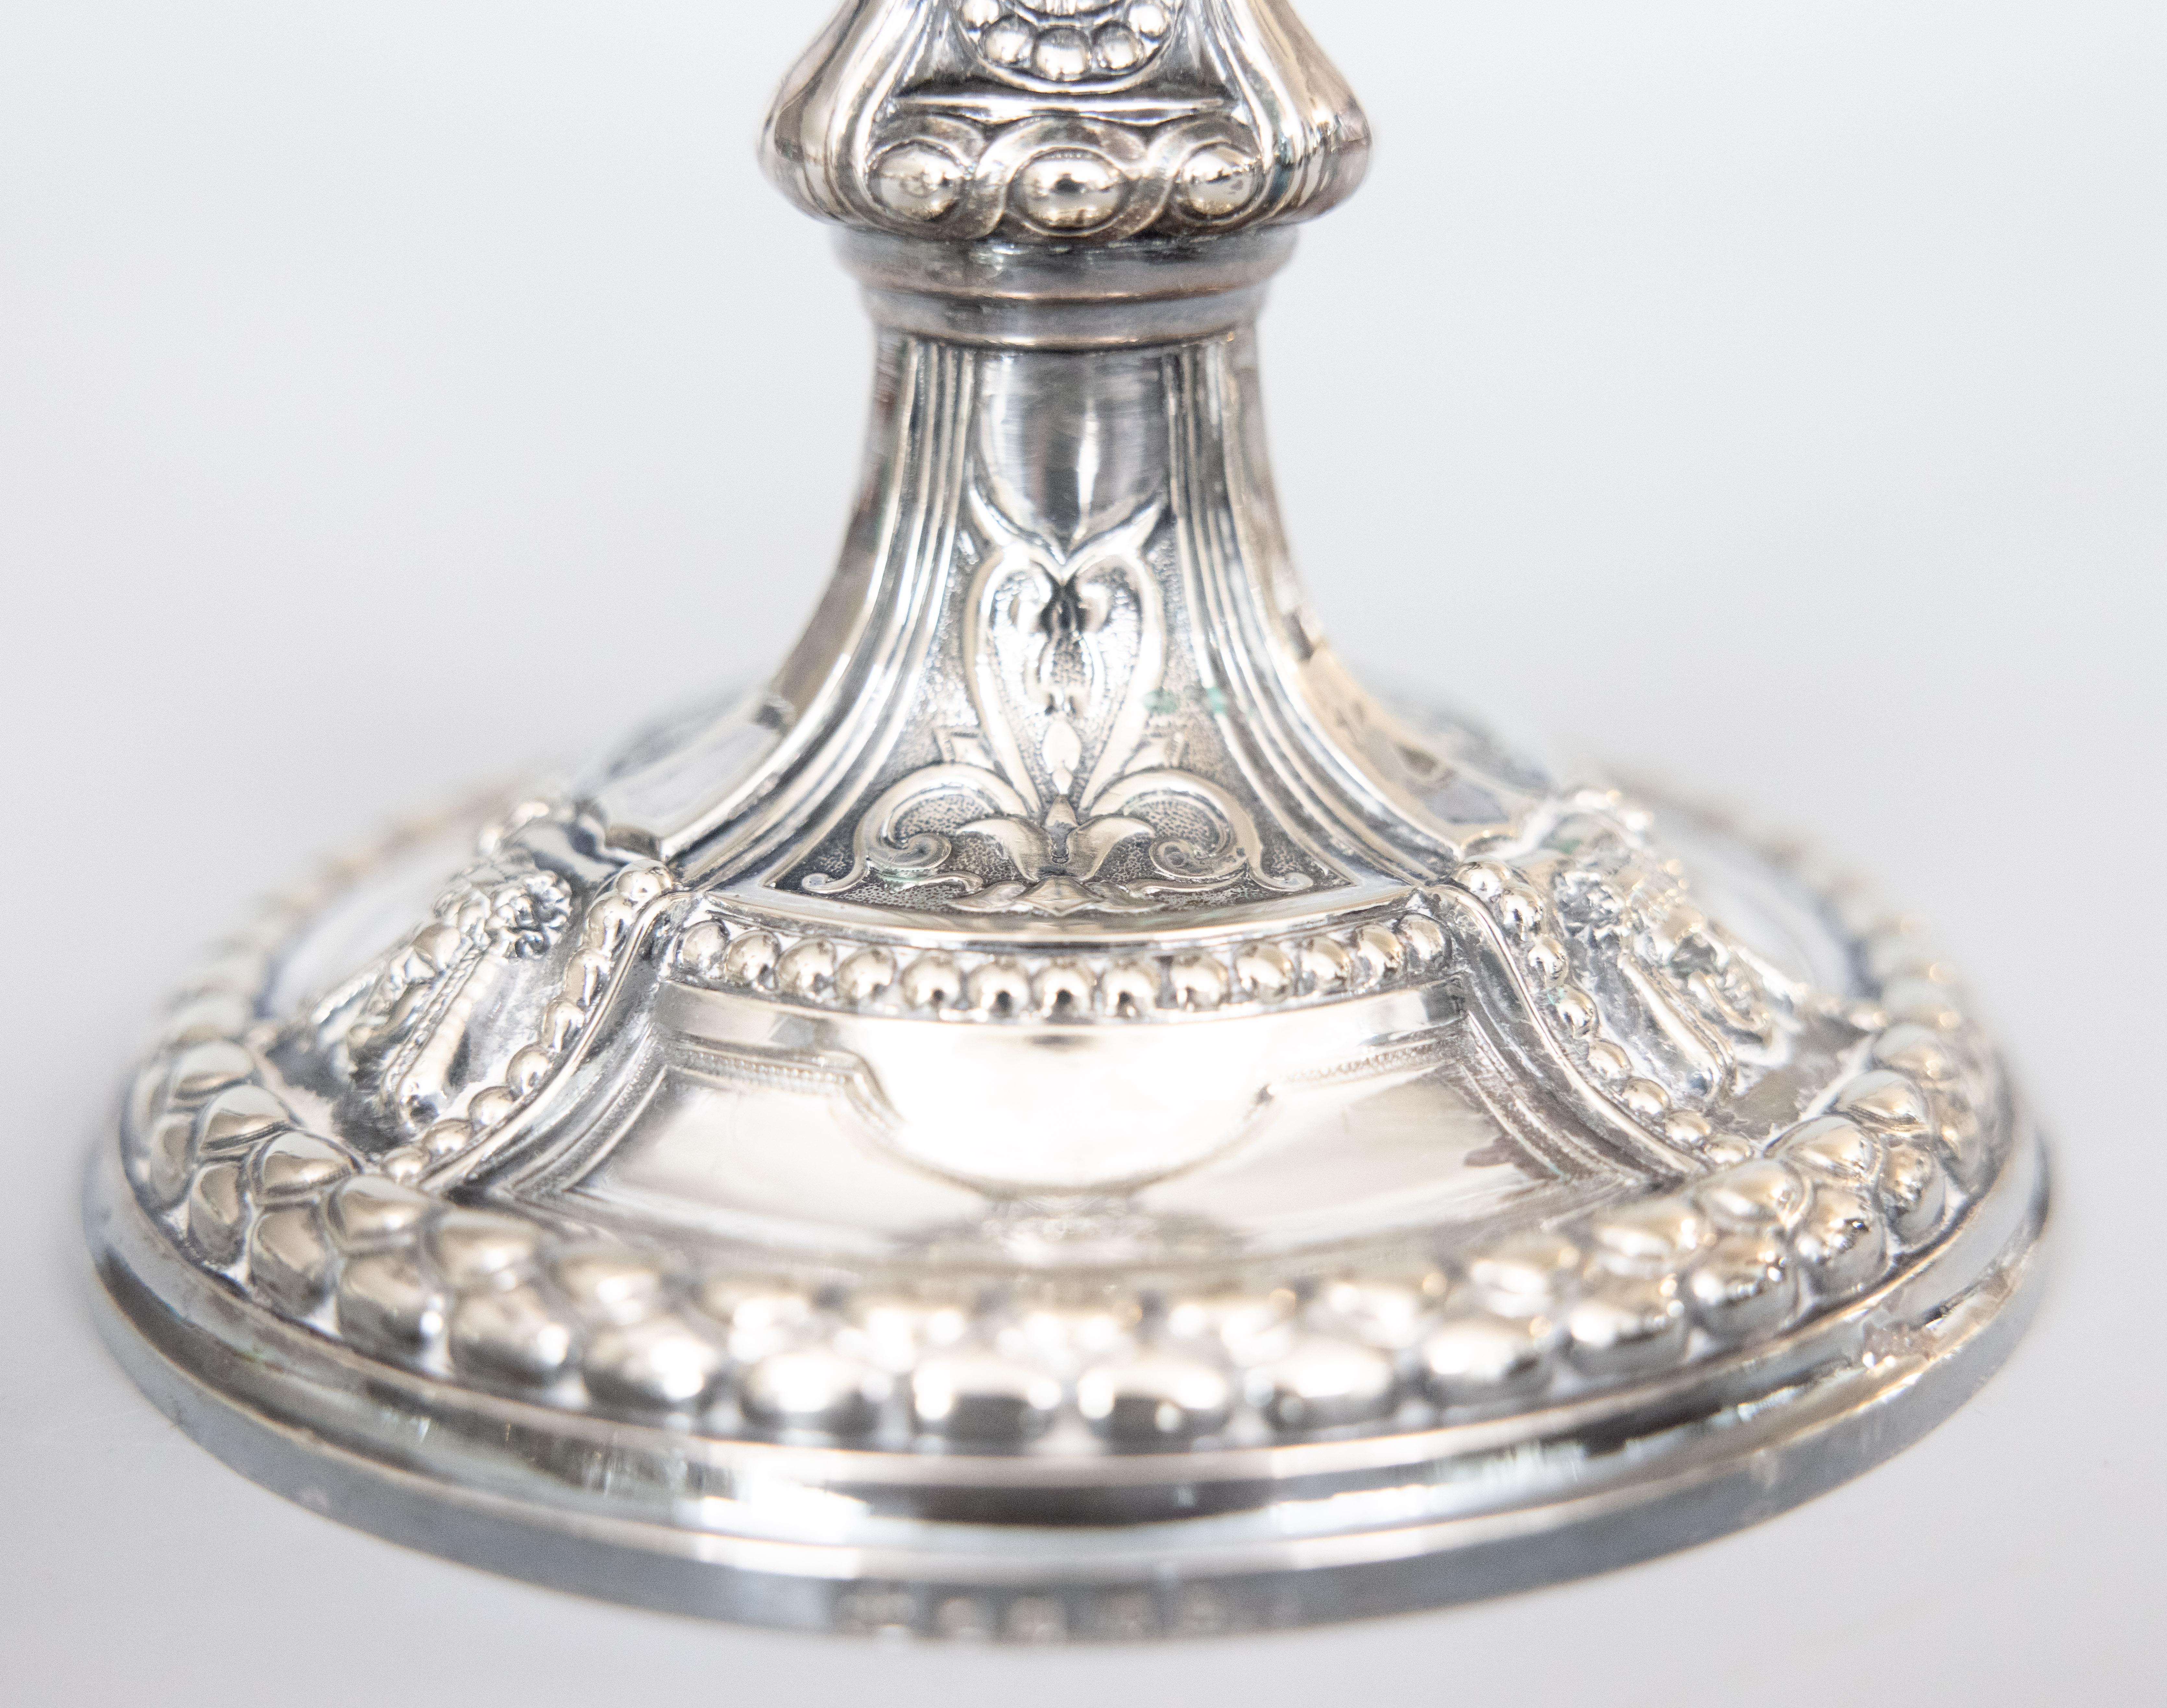 Pair of Antique Neoclassical Style English Silver Plate Candlesticks c. 1900 For Sale 2